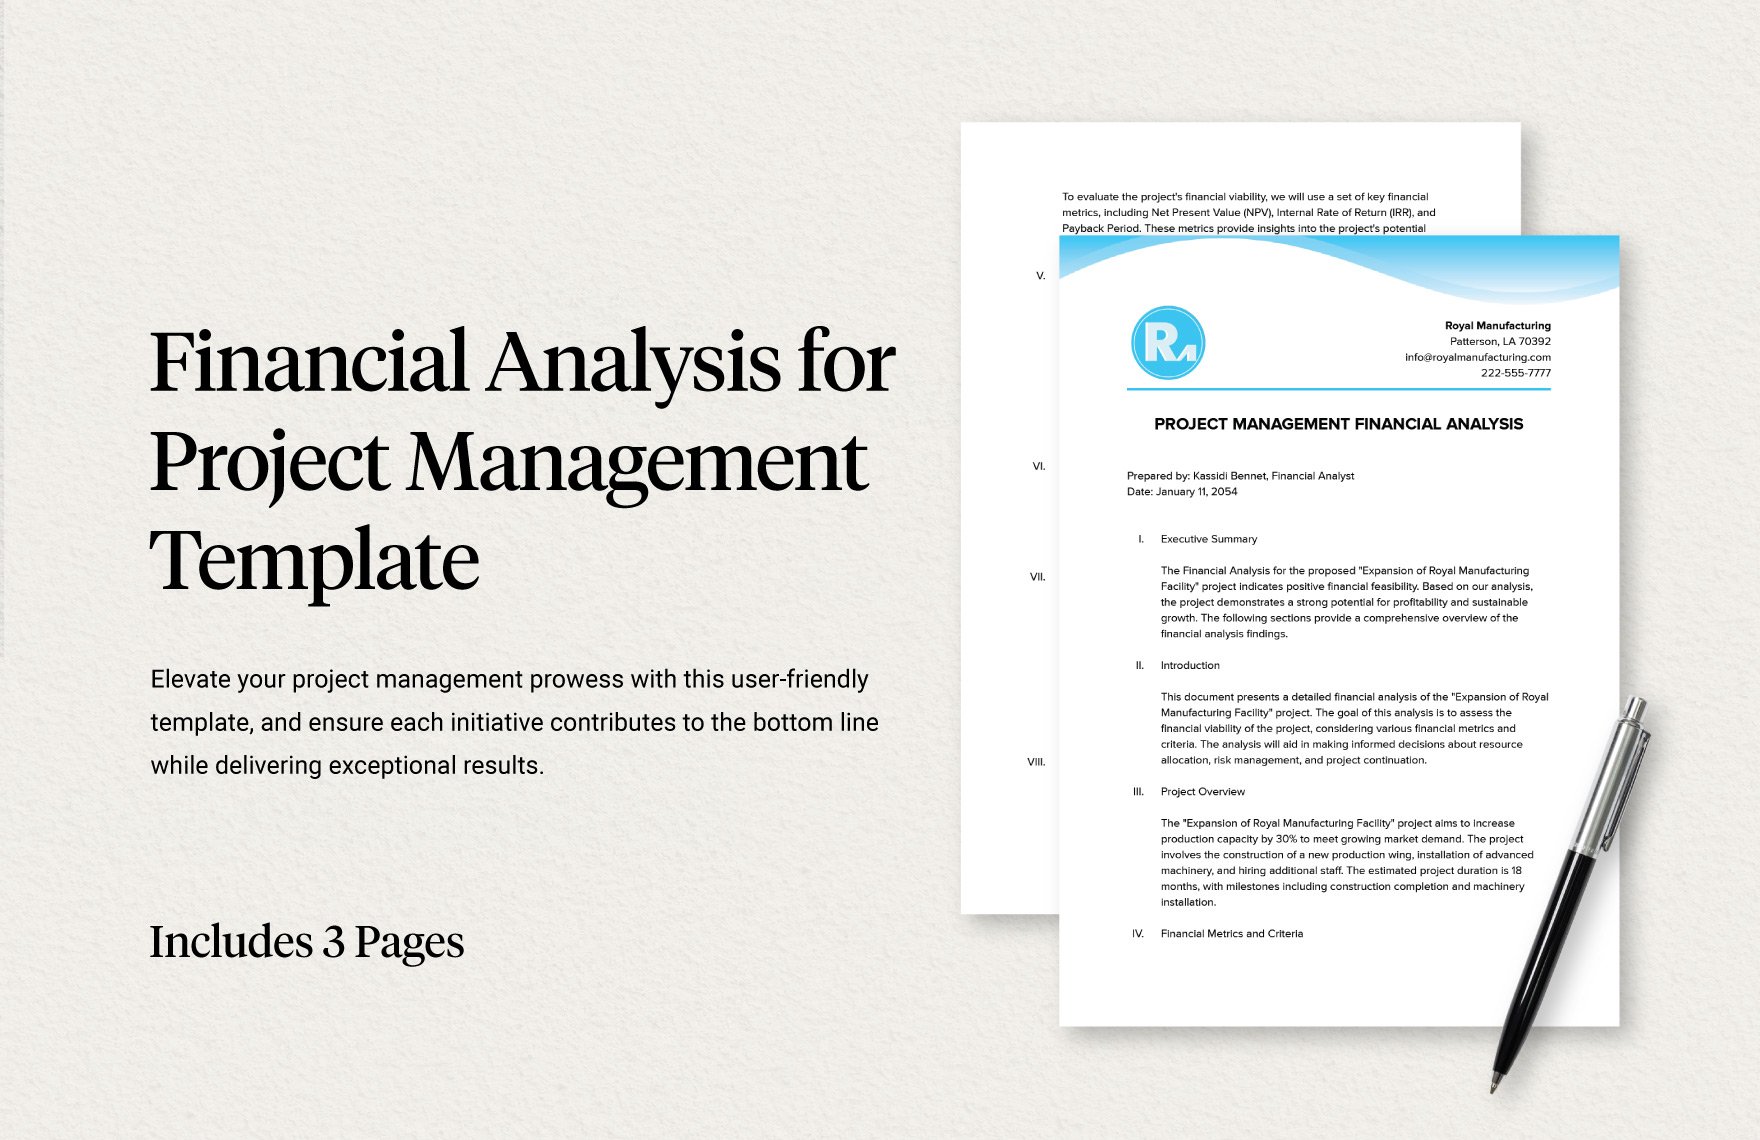 Financial Analysis for Project Management Template